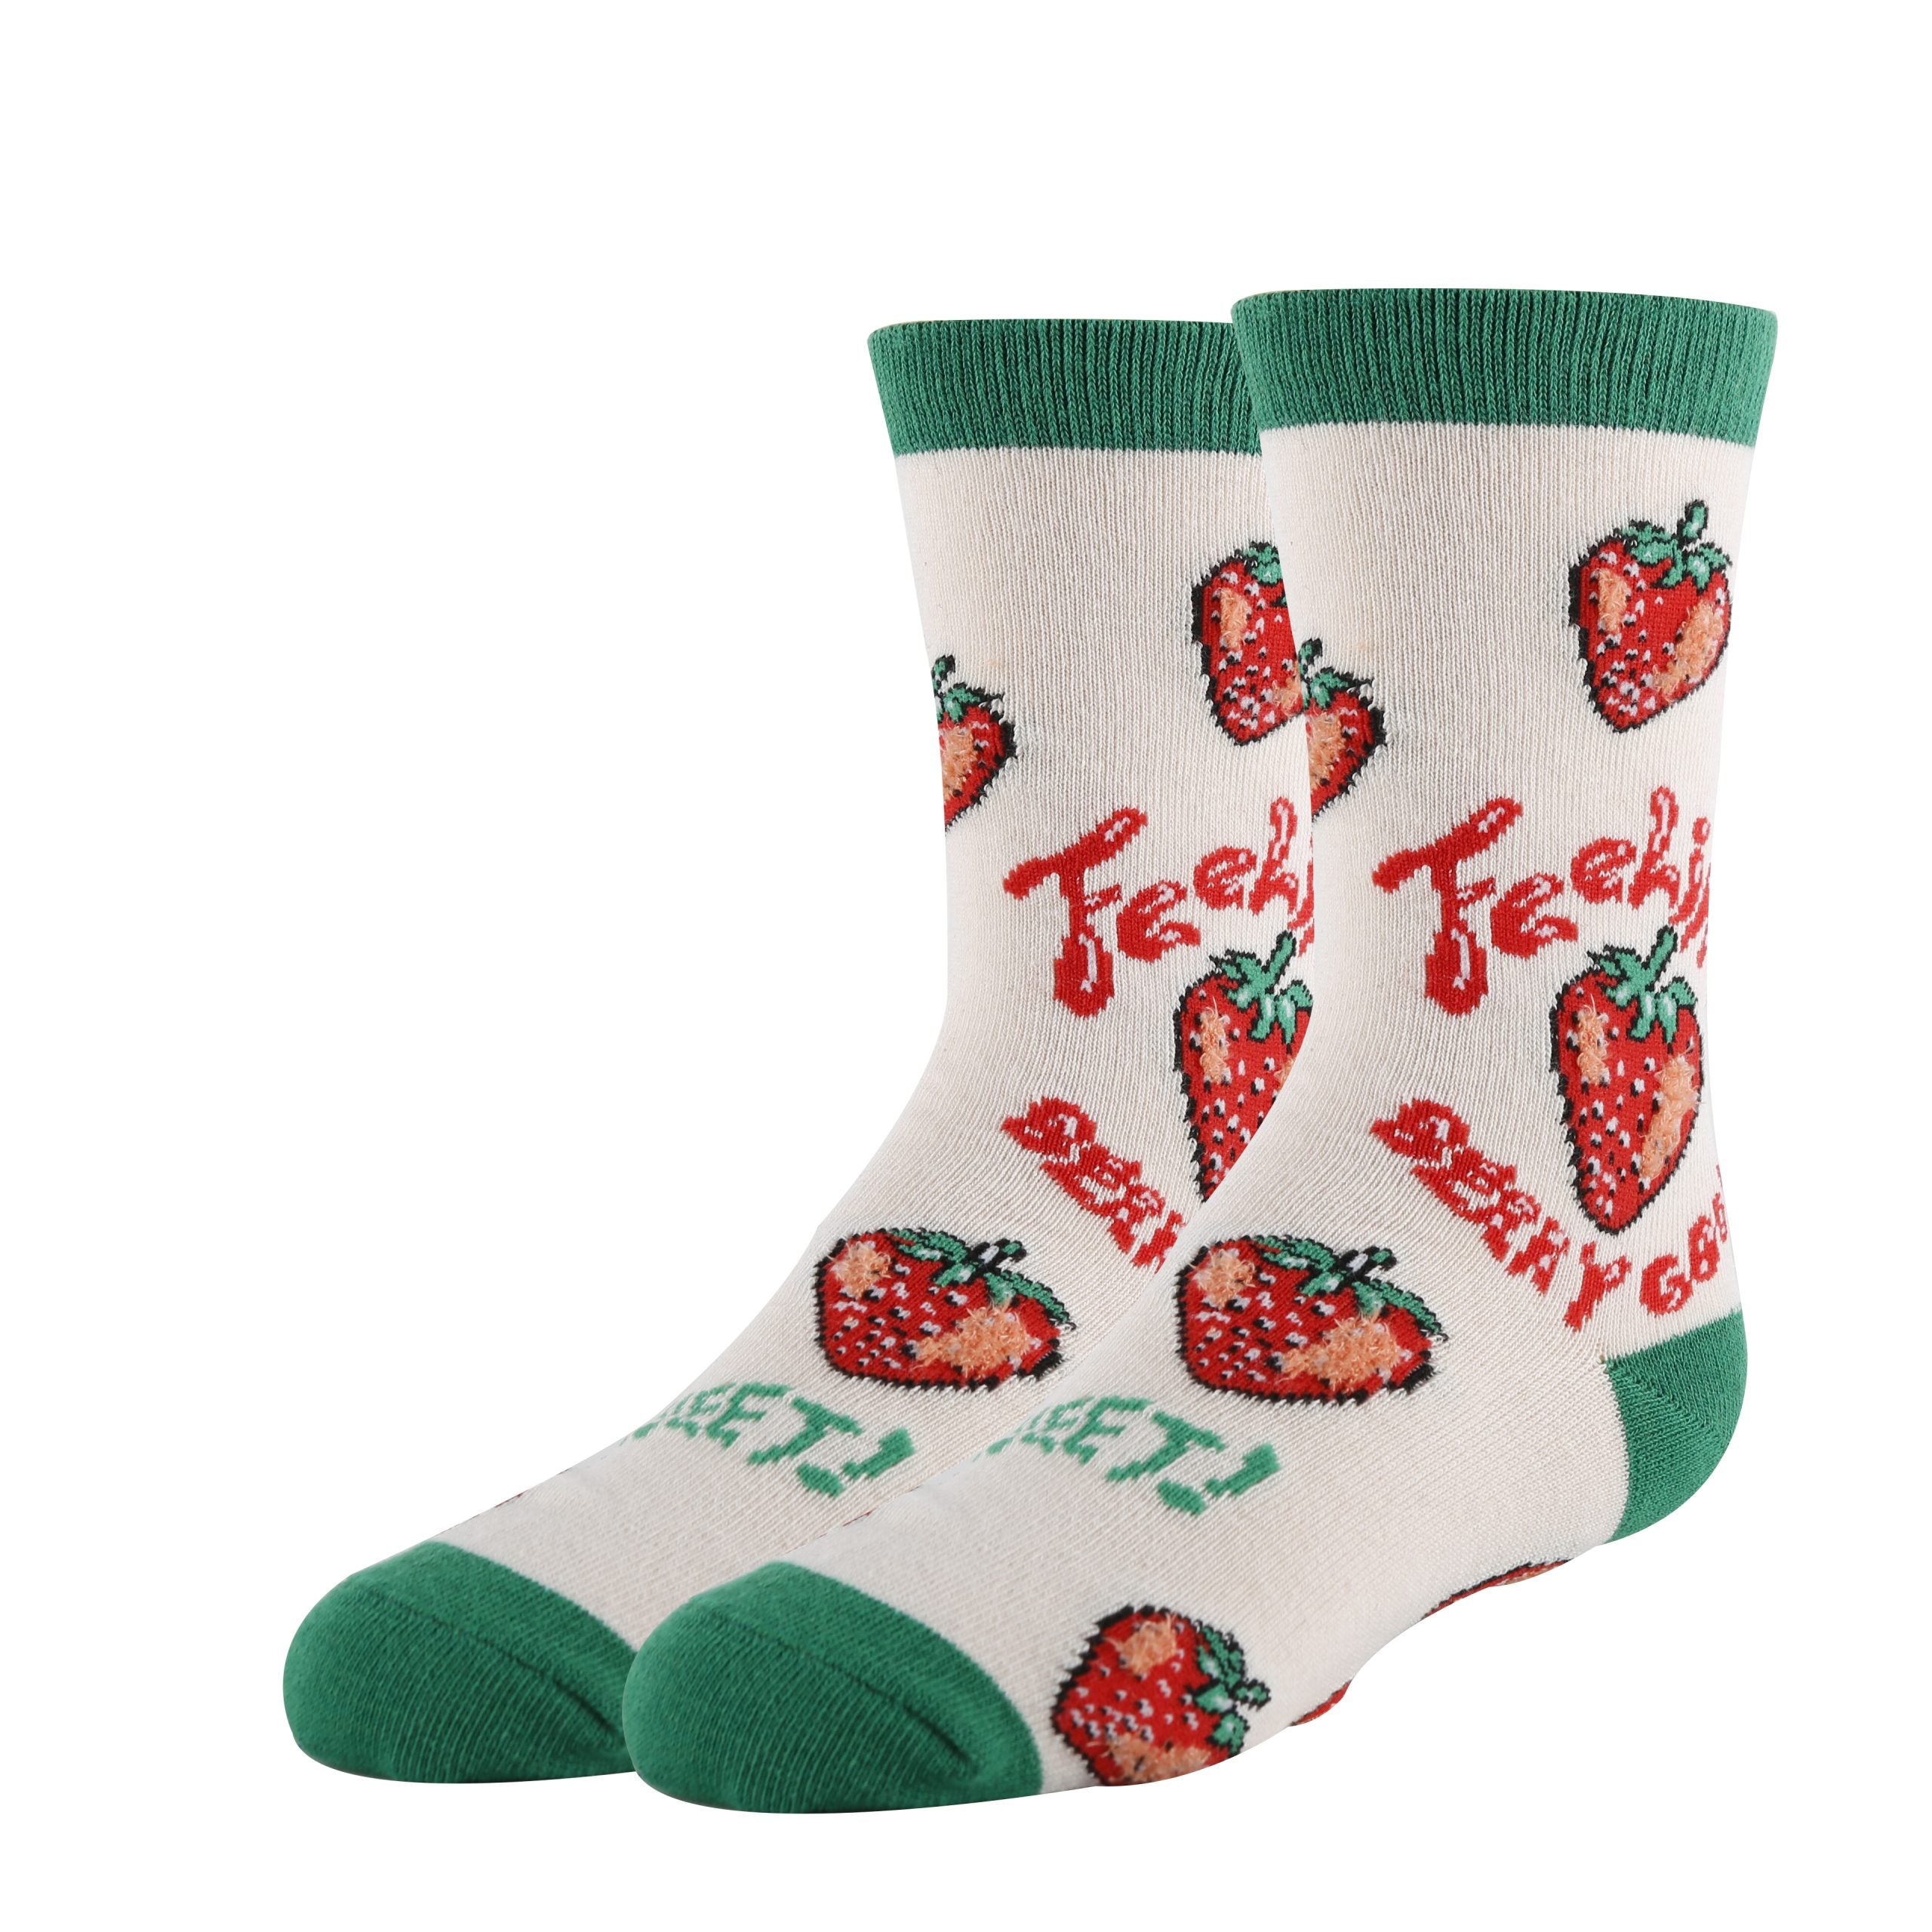 Hop To It With These New Easter Bunny Mickey Mouse Socks